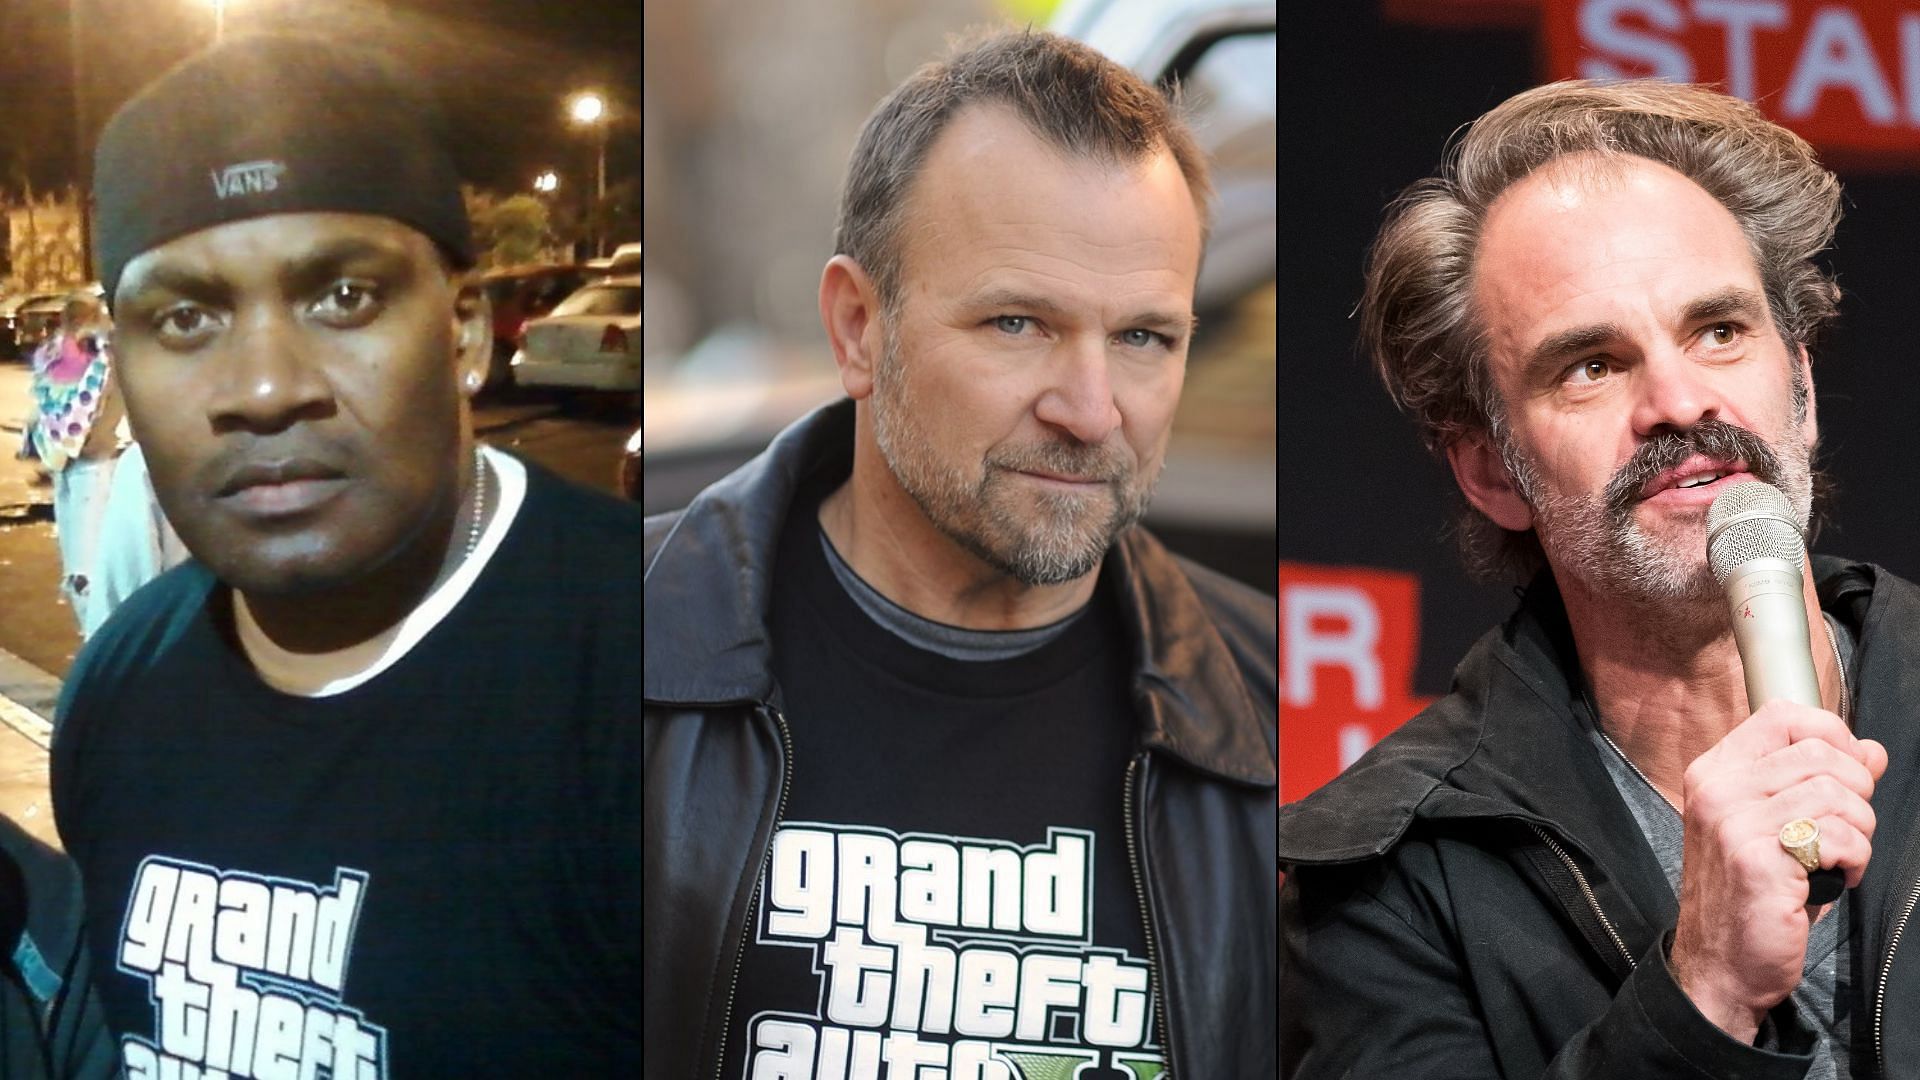 Who Are The Voice Actors For The Gta 5 Protagonists